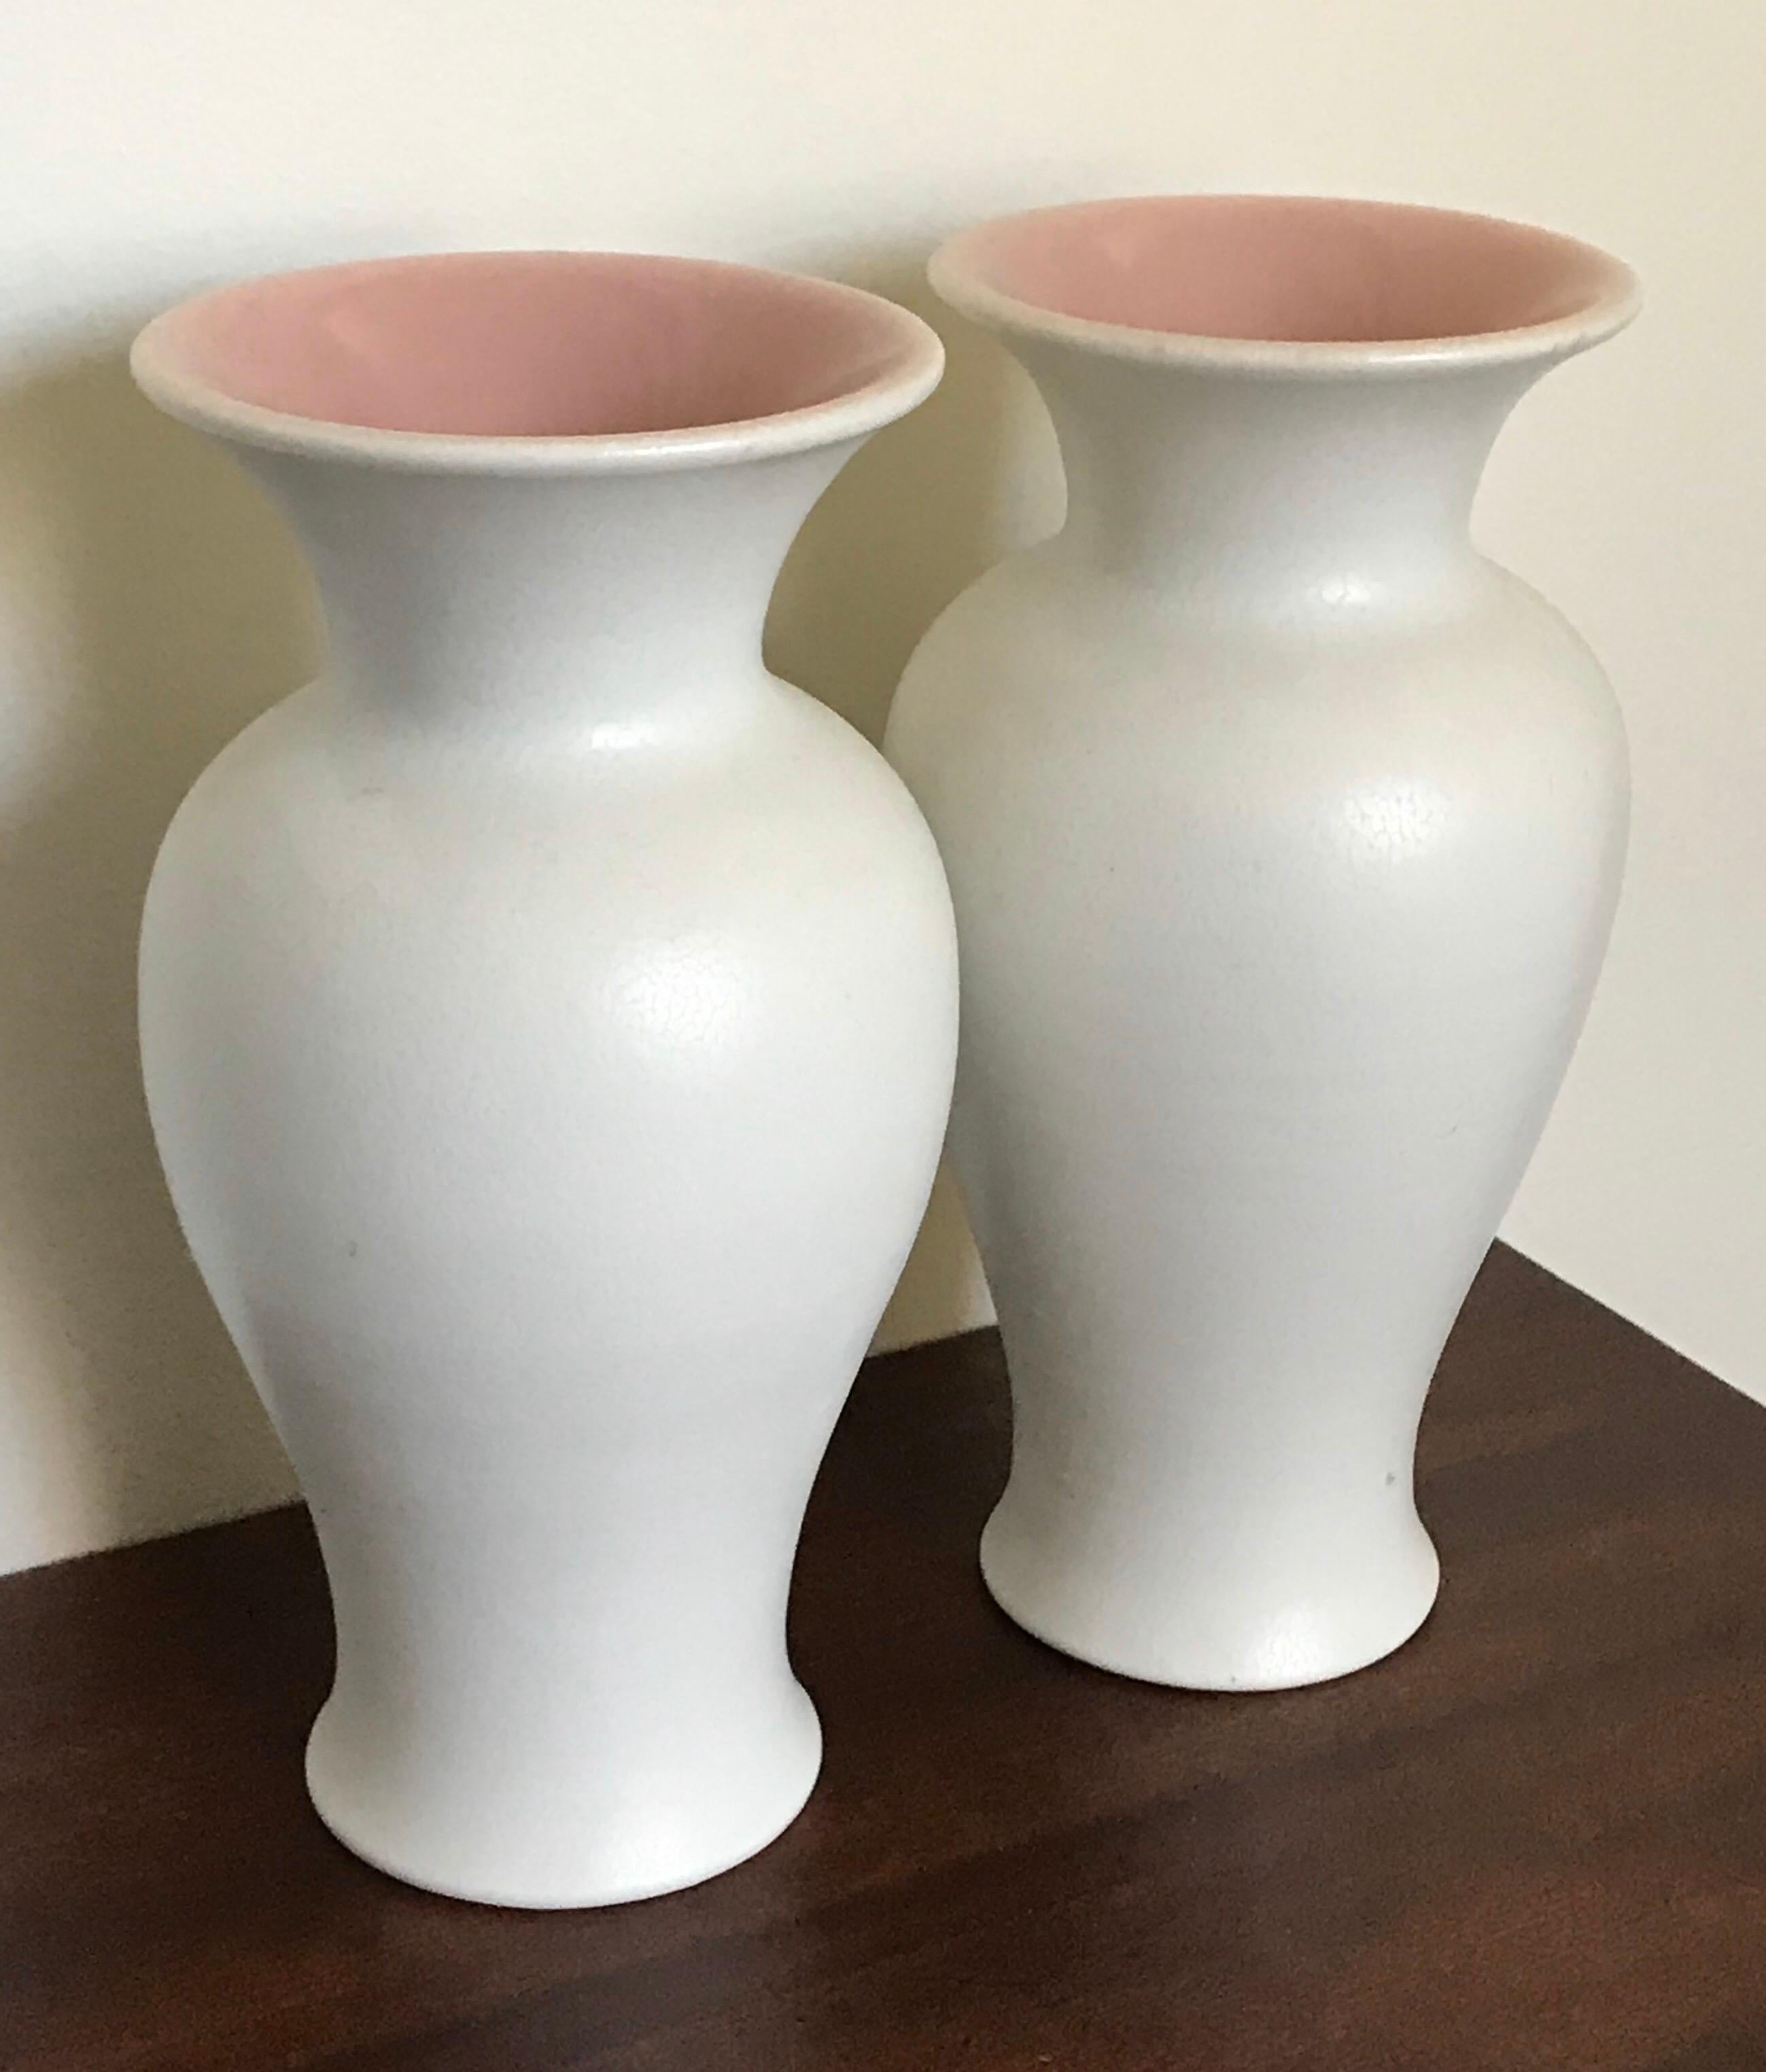 Beautiful pair of pearl white vases with subtle light pink insides by Rookwood Pottery Company, 1927, hallmarked.